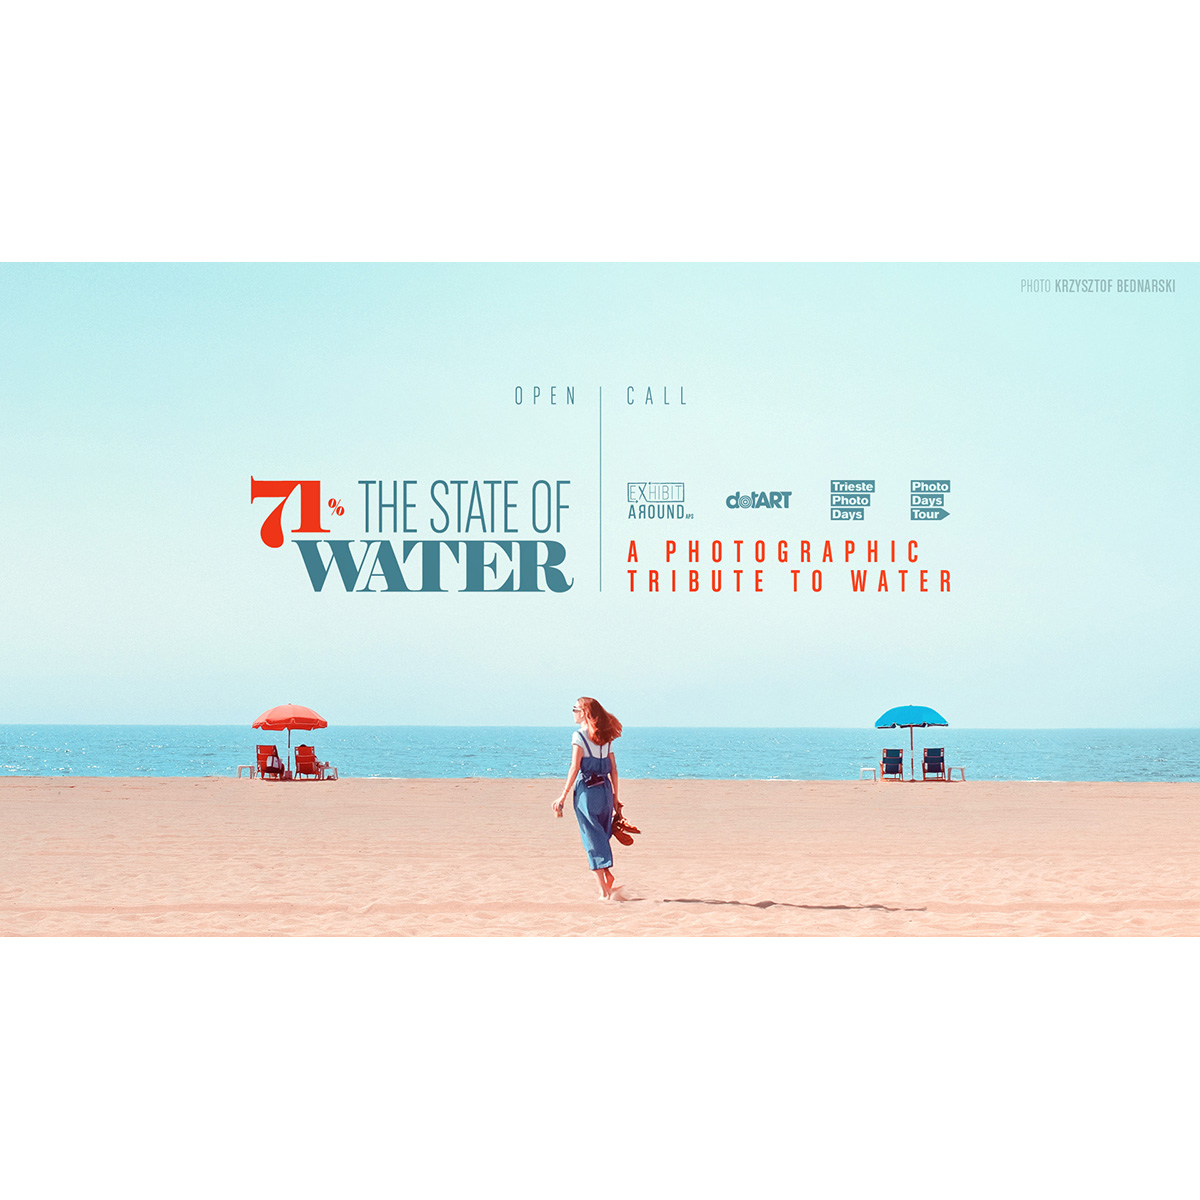 71% - The State of Water